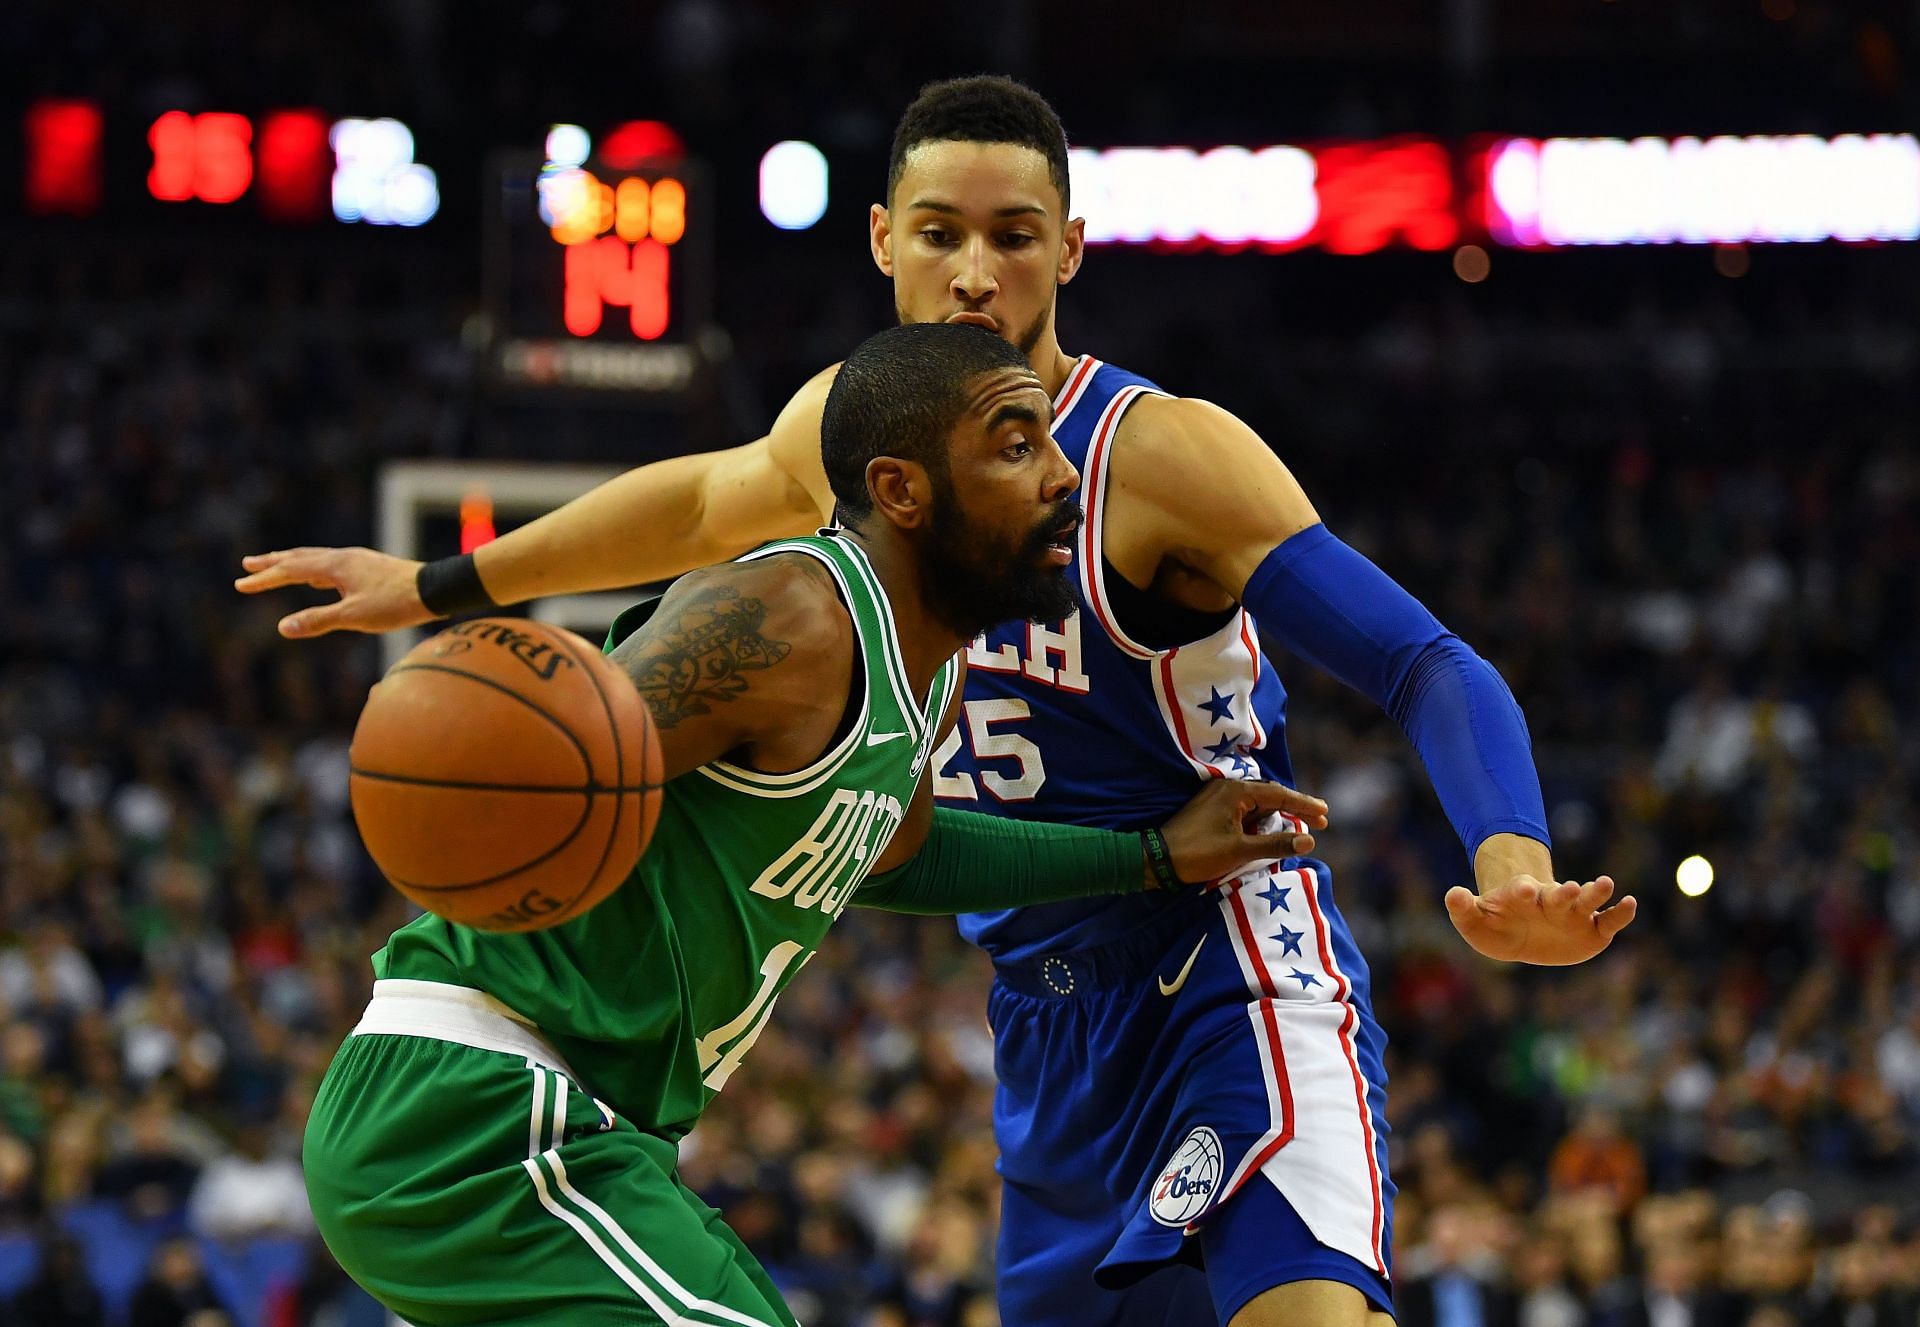 Ben Simmons guards Kyrie Irving during a game